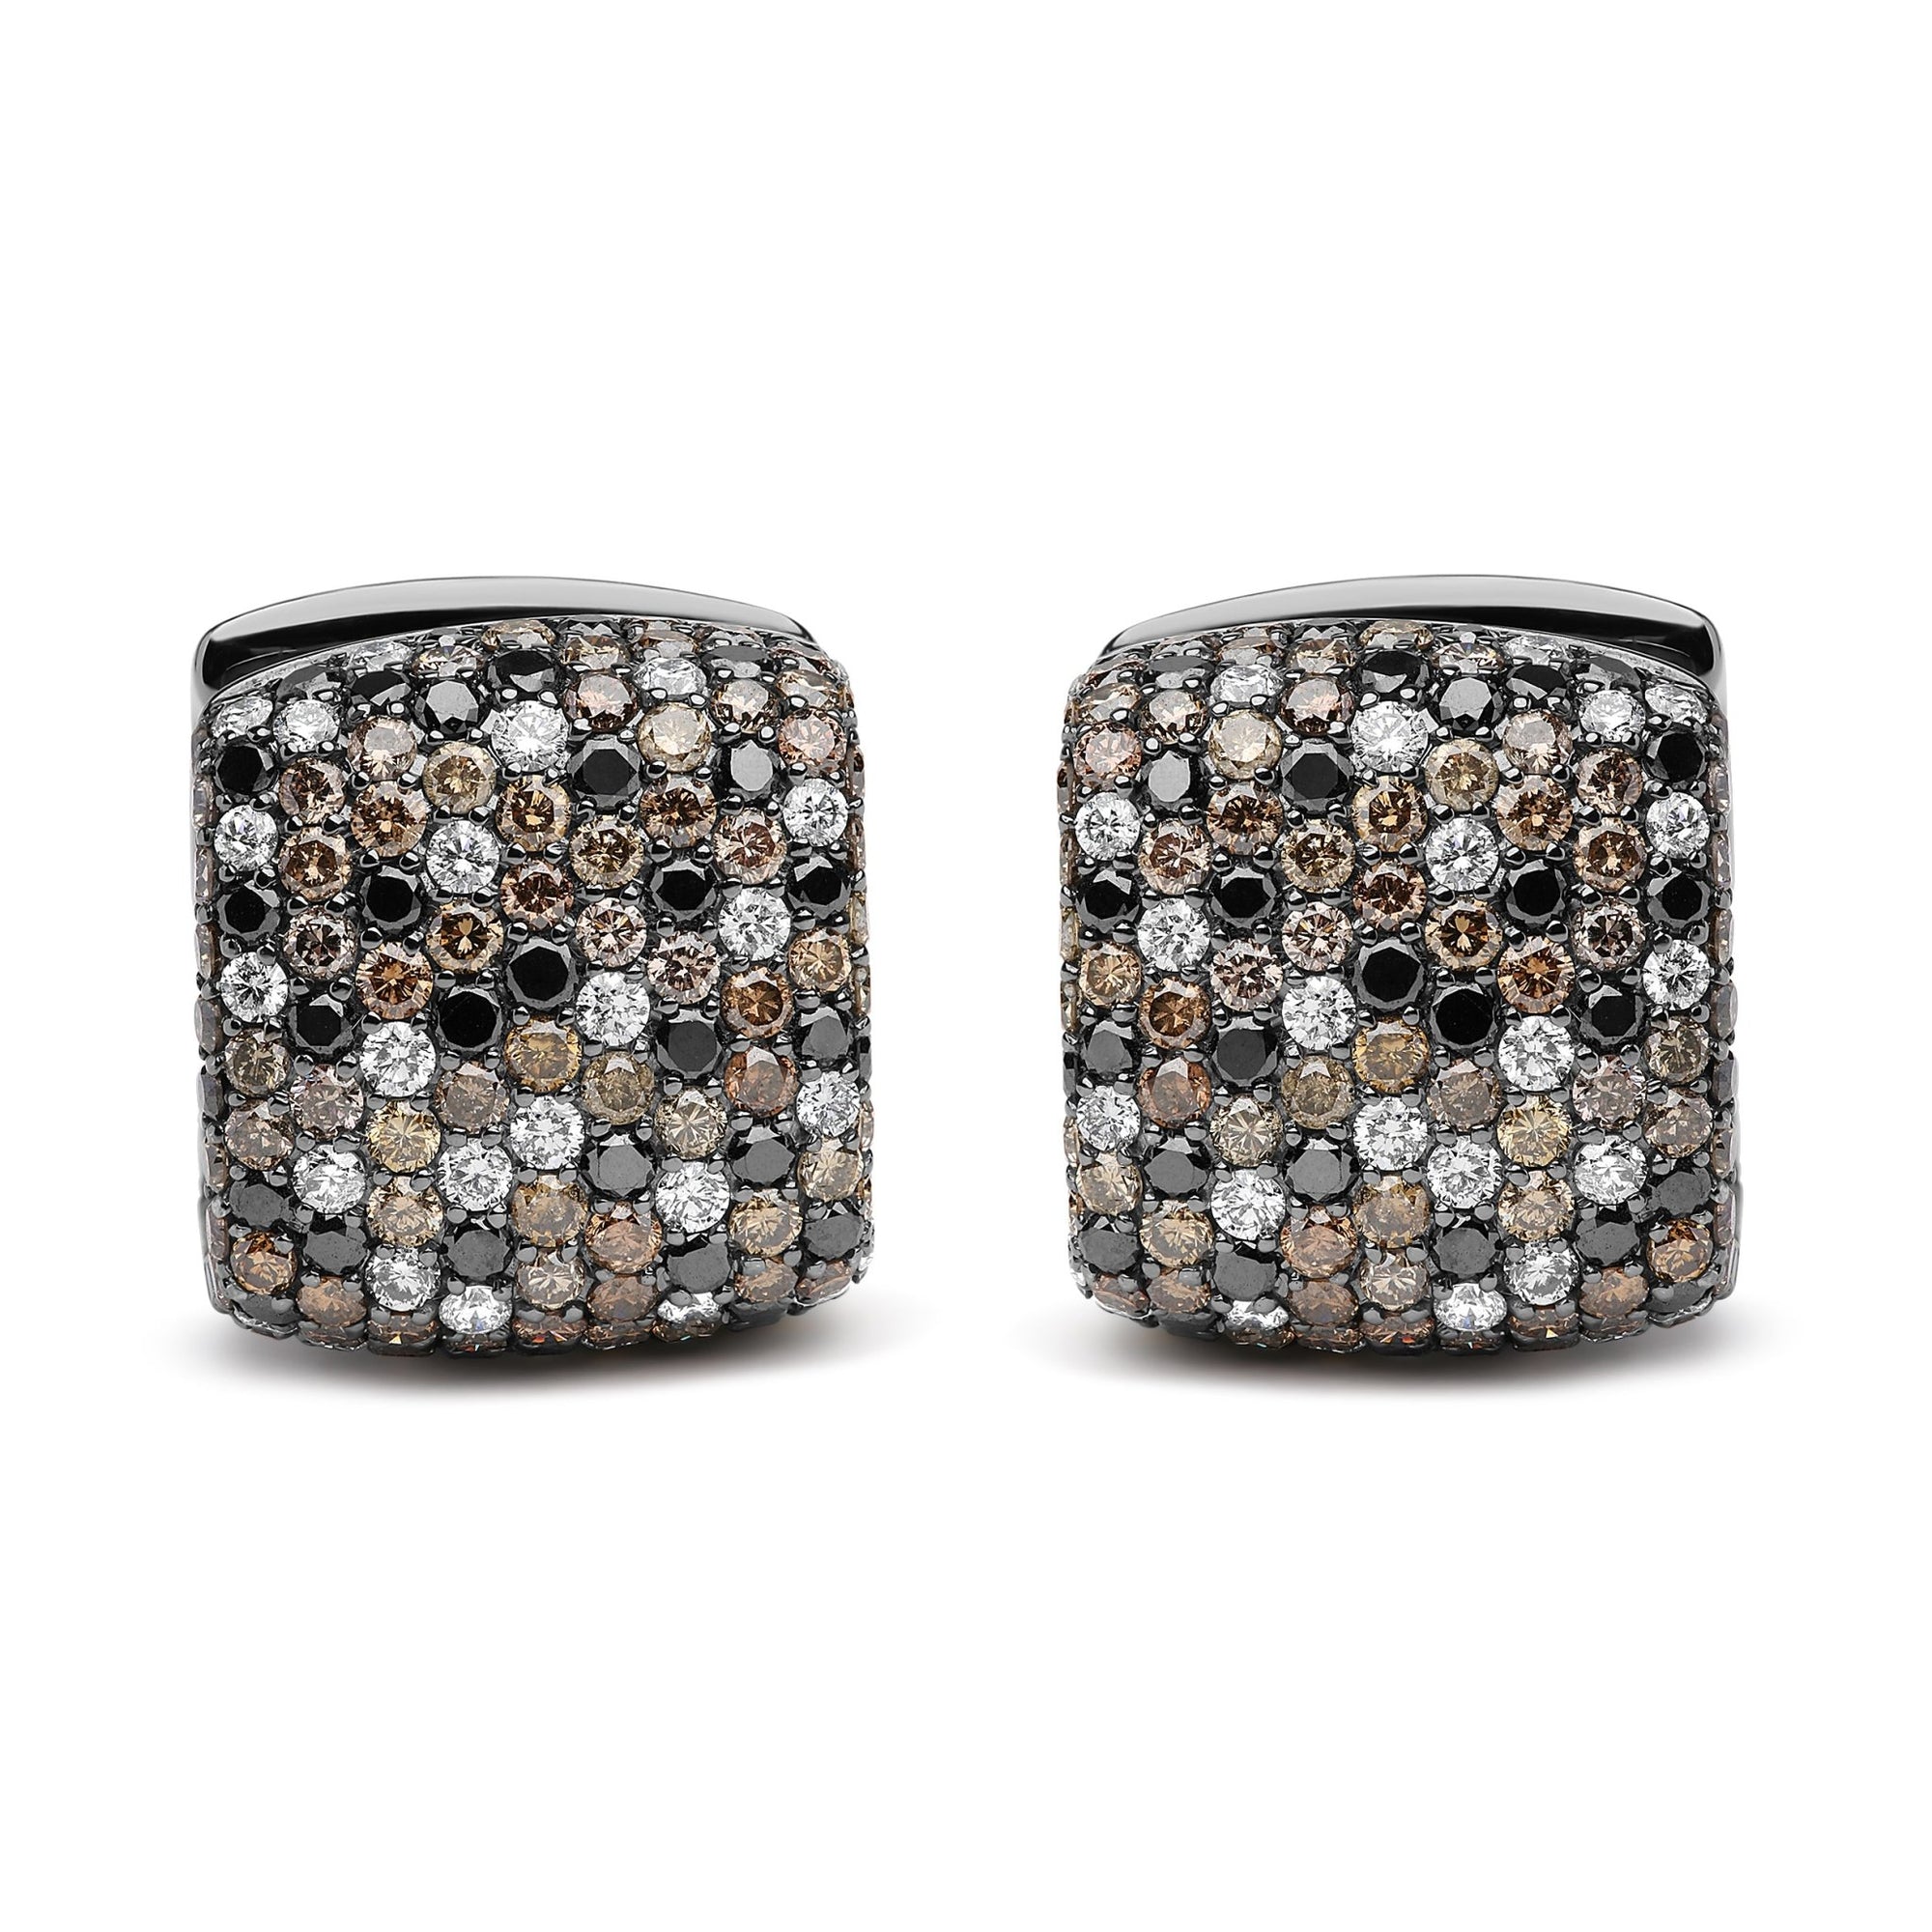 Black Rhodium Plated 18K White Gold 12 5/8 Cttw Multi Color Diamond Square Domed Huggie Hoop Earrings (Brown, Black, G-H Color, SI1-SI2 Clarity) - LinkagejewelrydesignLinkagejewelrydesign